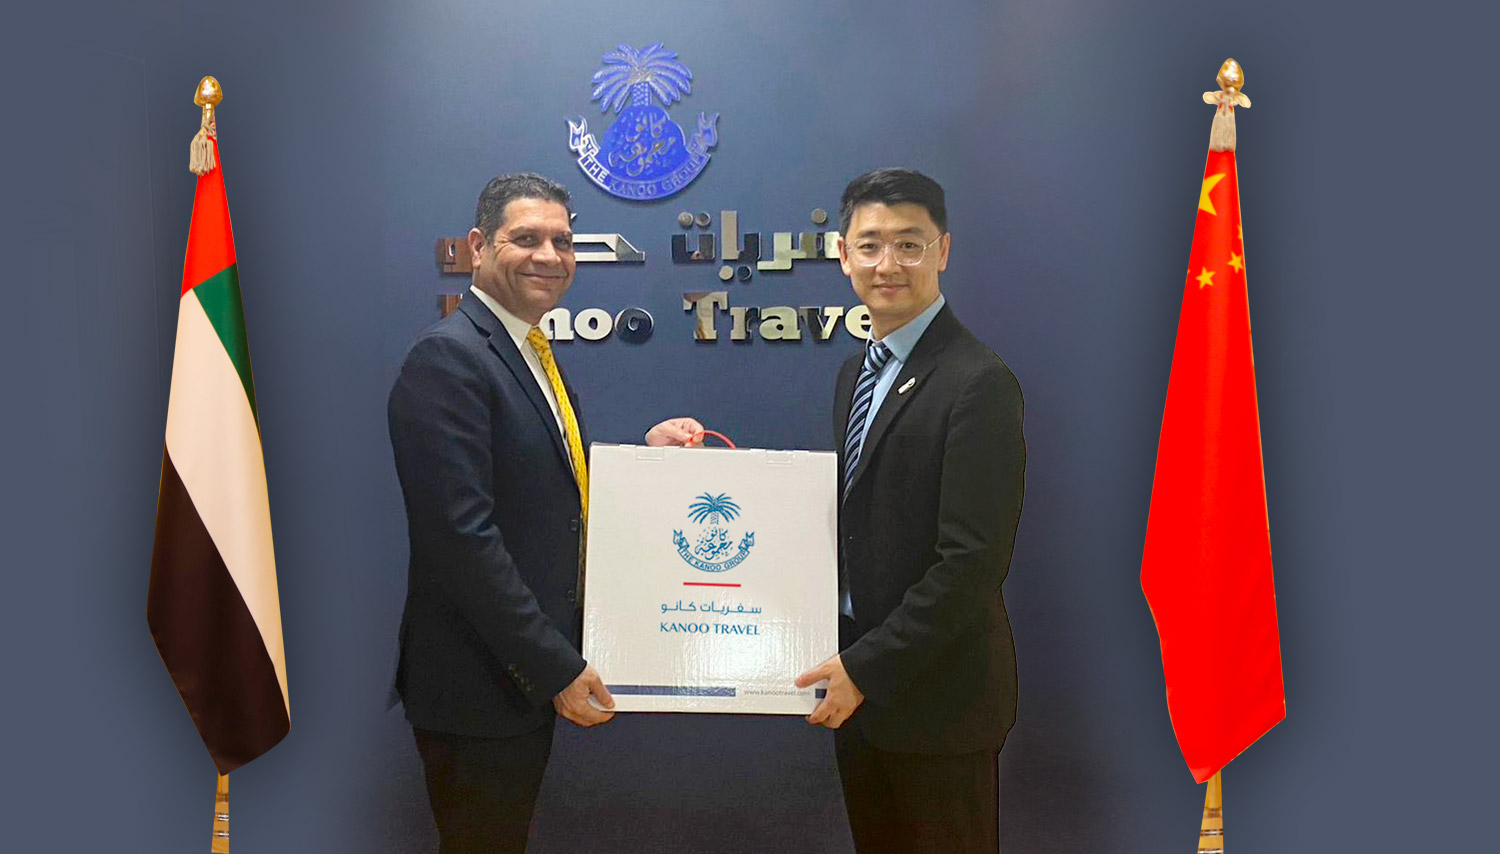 Kanoo Travel forges a strategic partnership with the Ministry of Culture and Tourism of the People’s Republic of China”